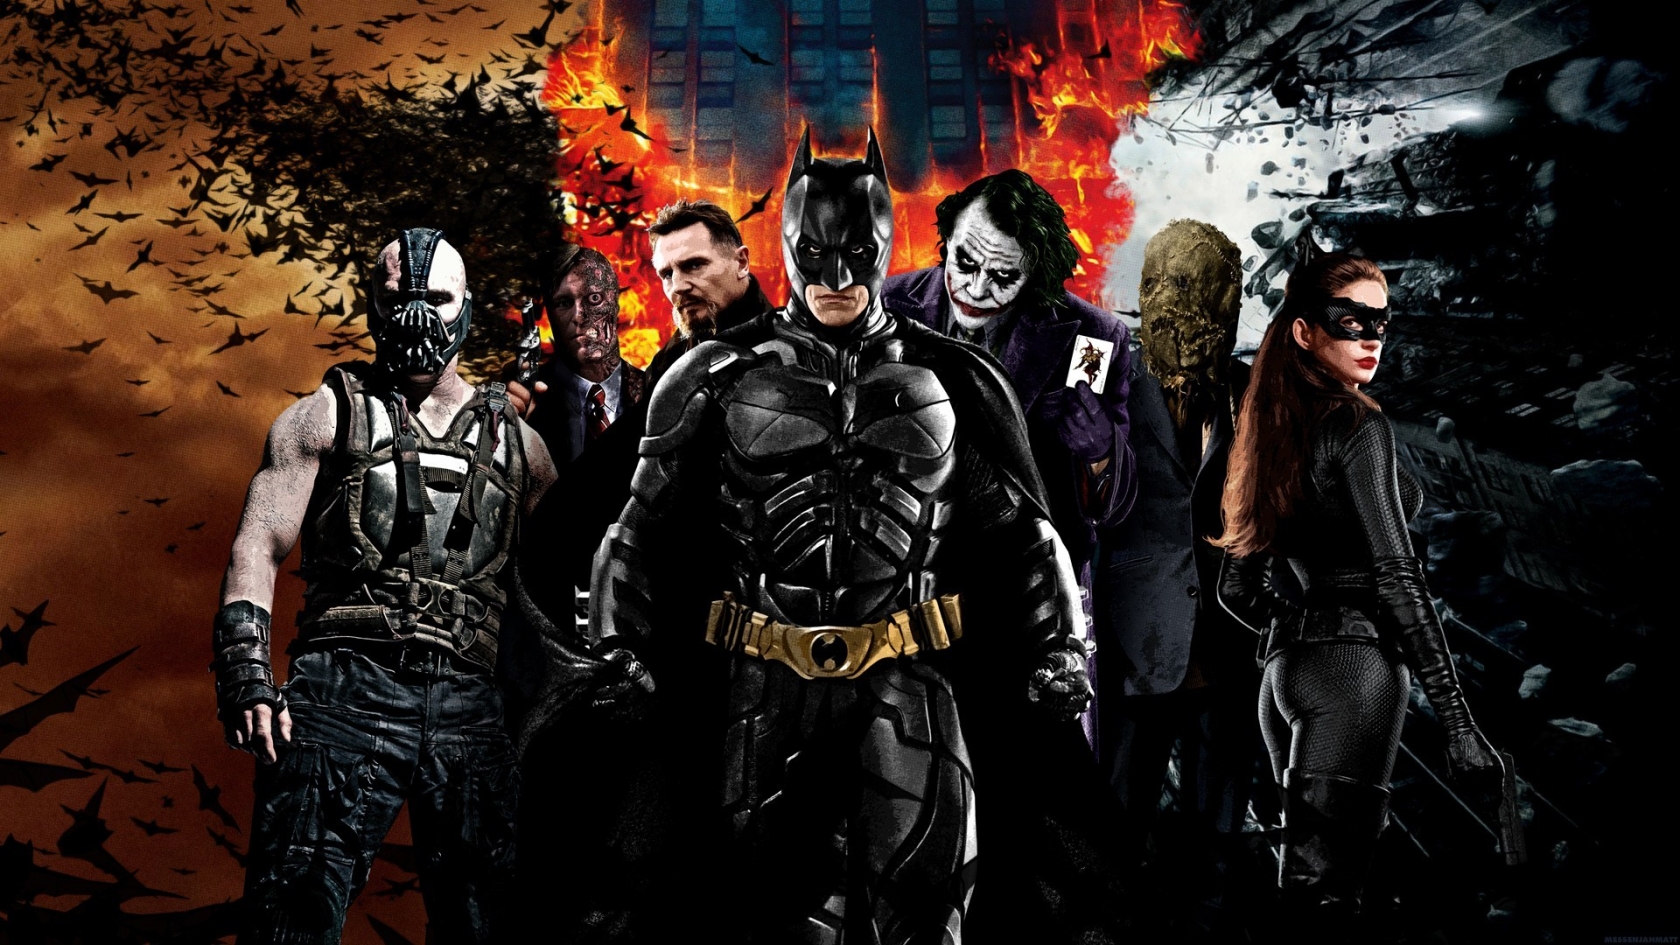 The Dark Knight Characters for 1680 x 945 HDTV resolution